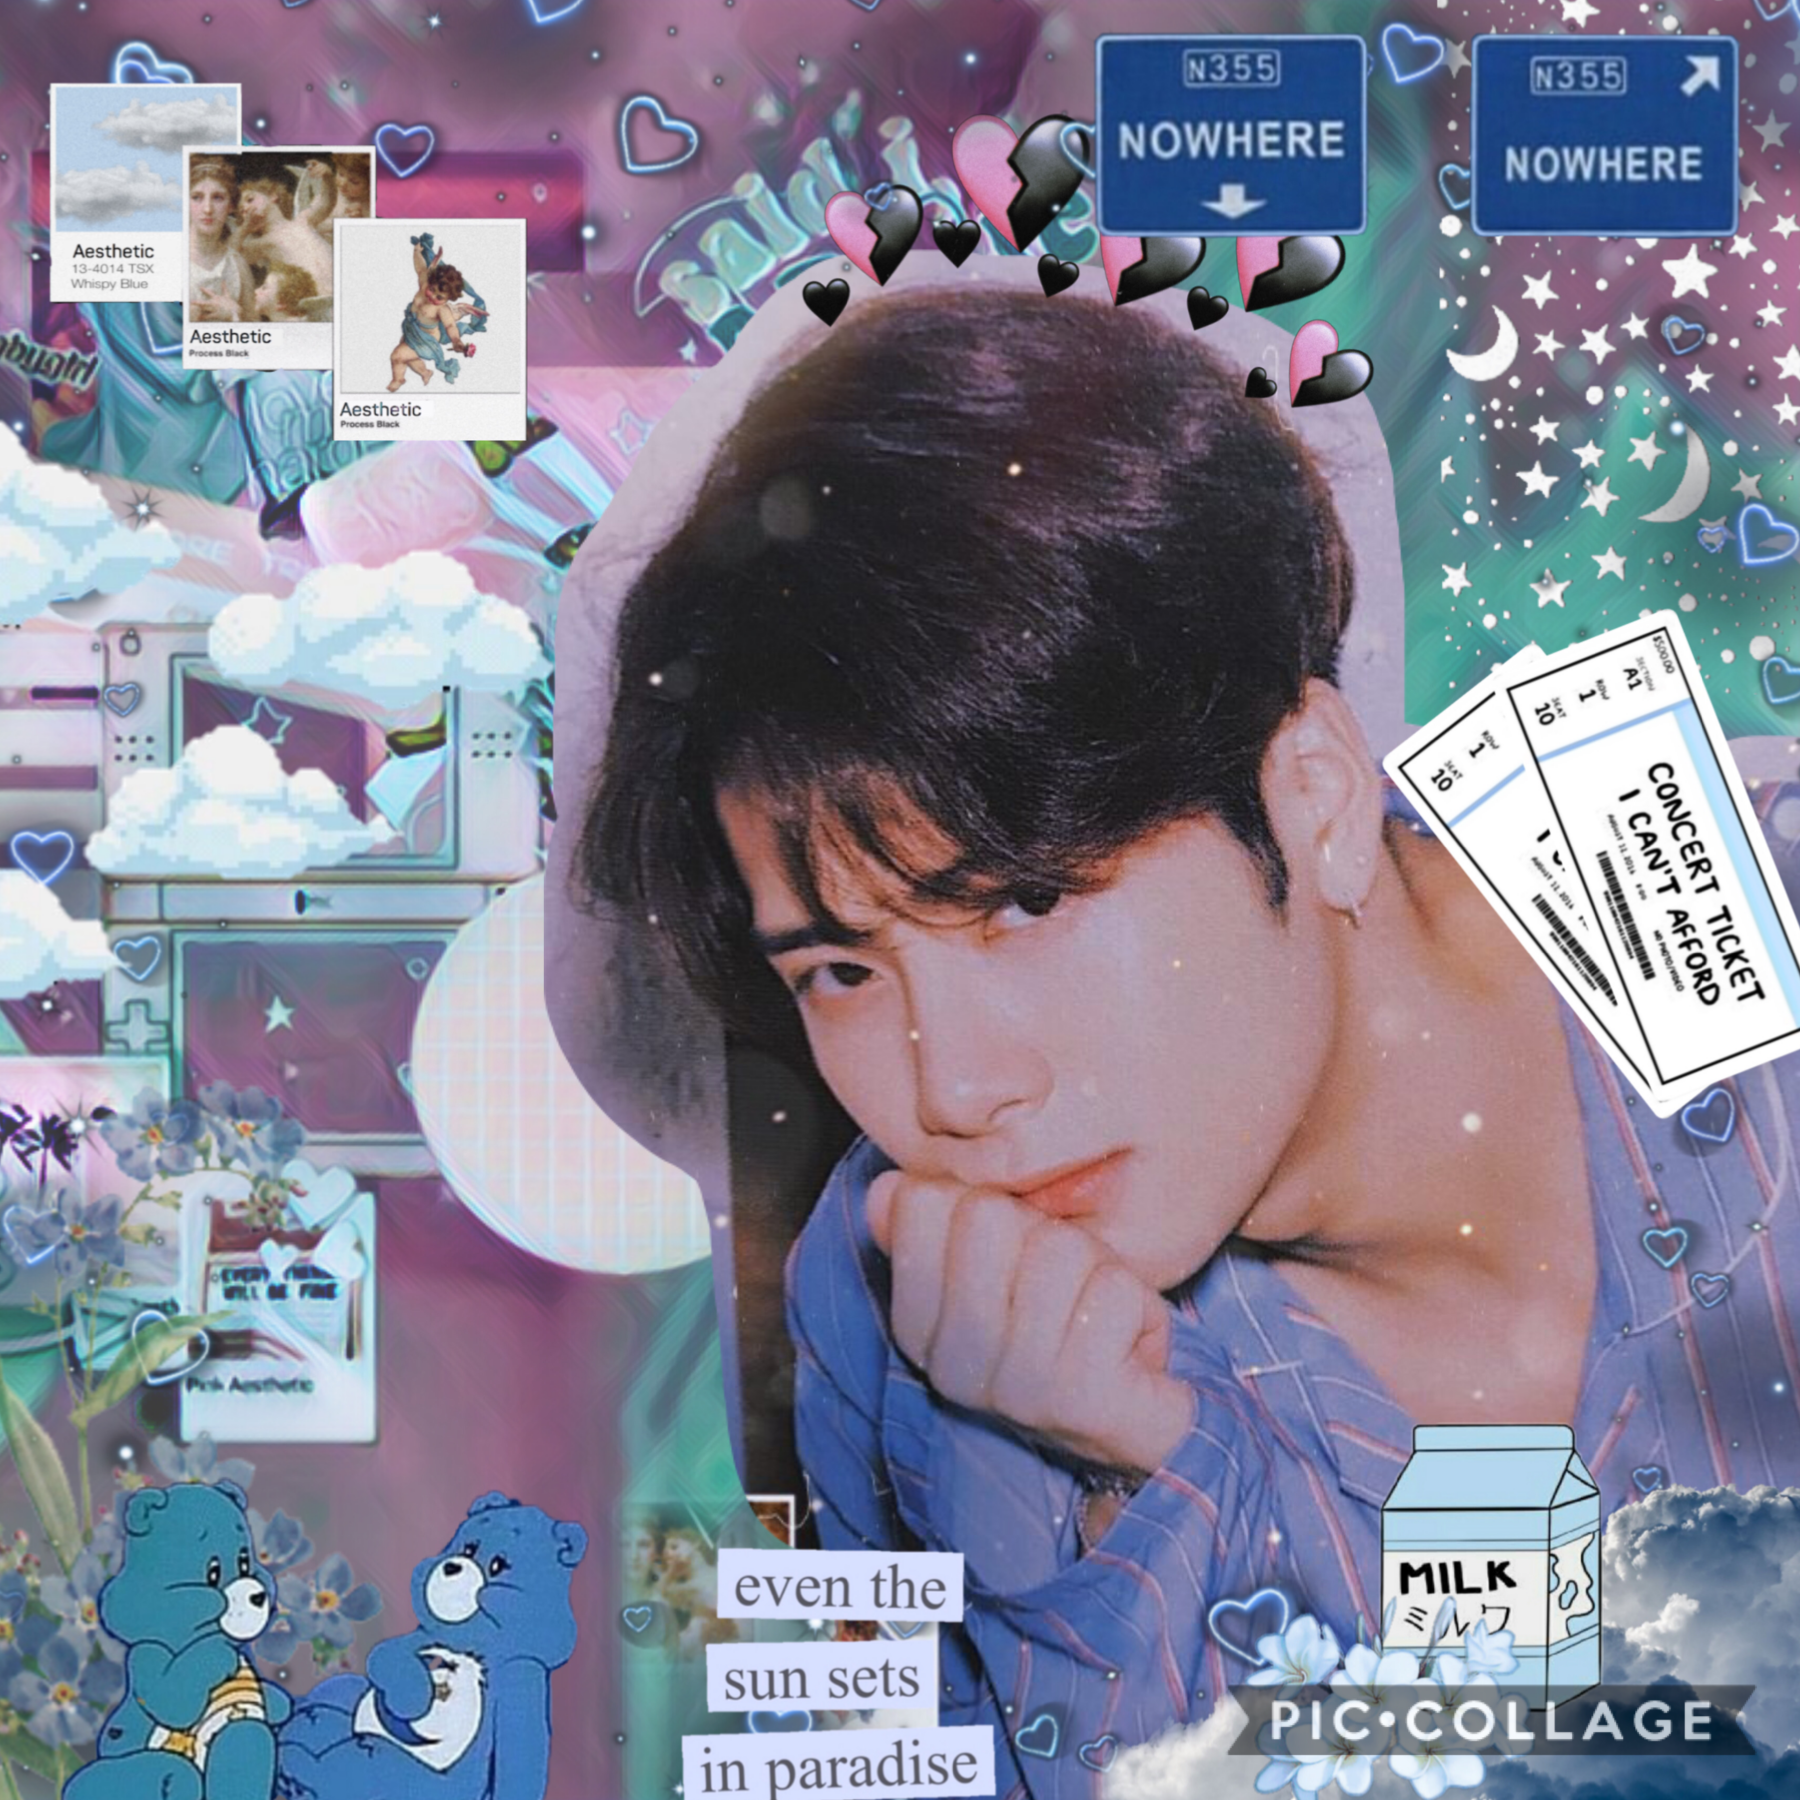 Collage by minttyoongi